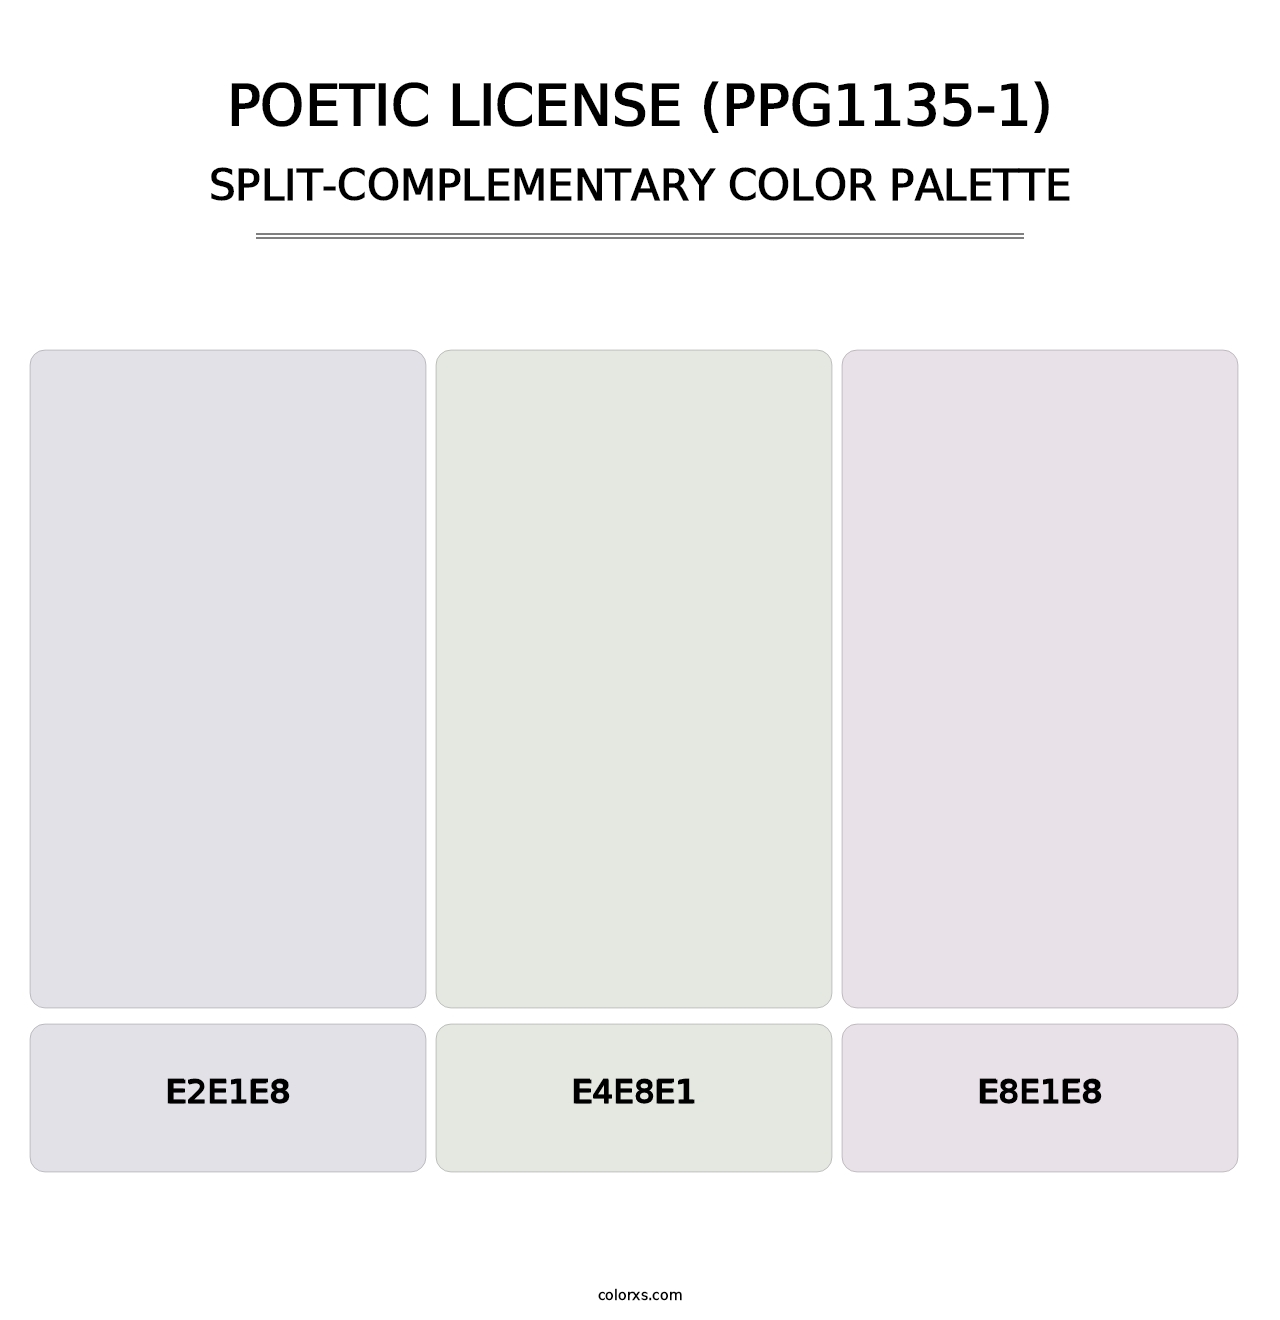 Poetic License (PPG1135-1) - Split-Complementary Color Palette